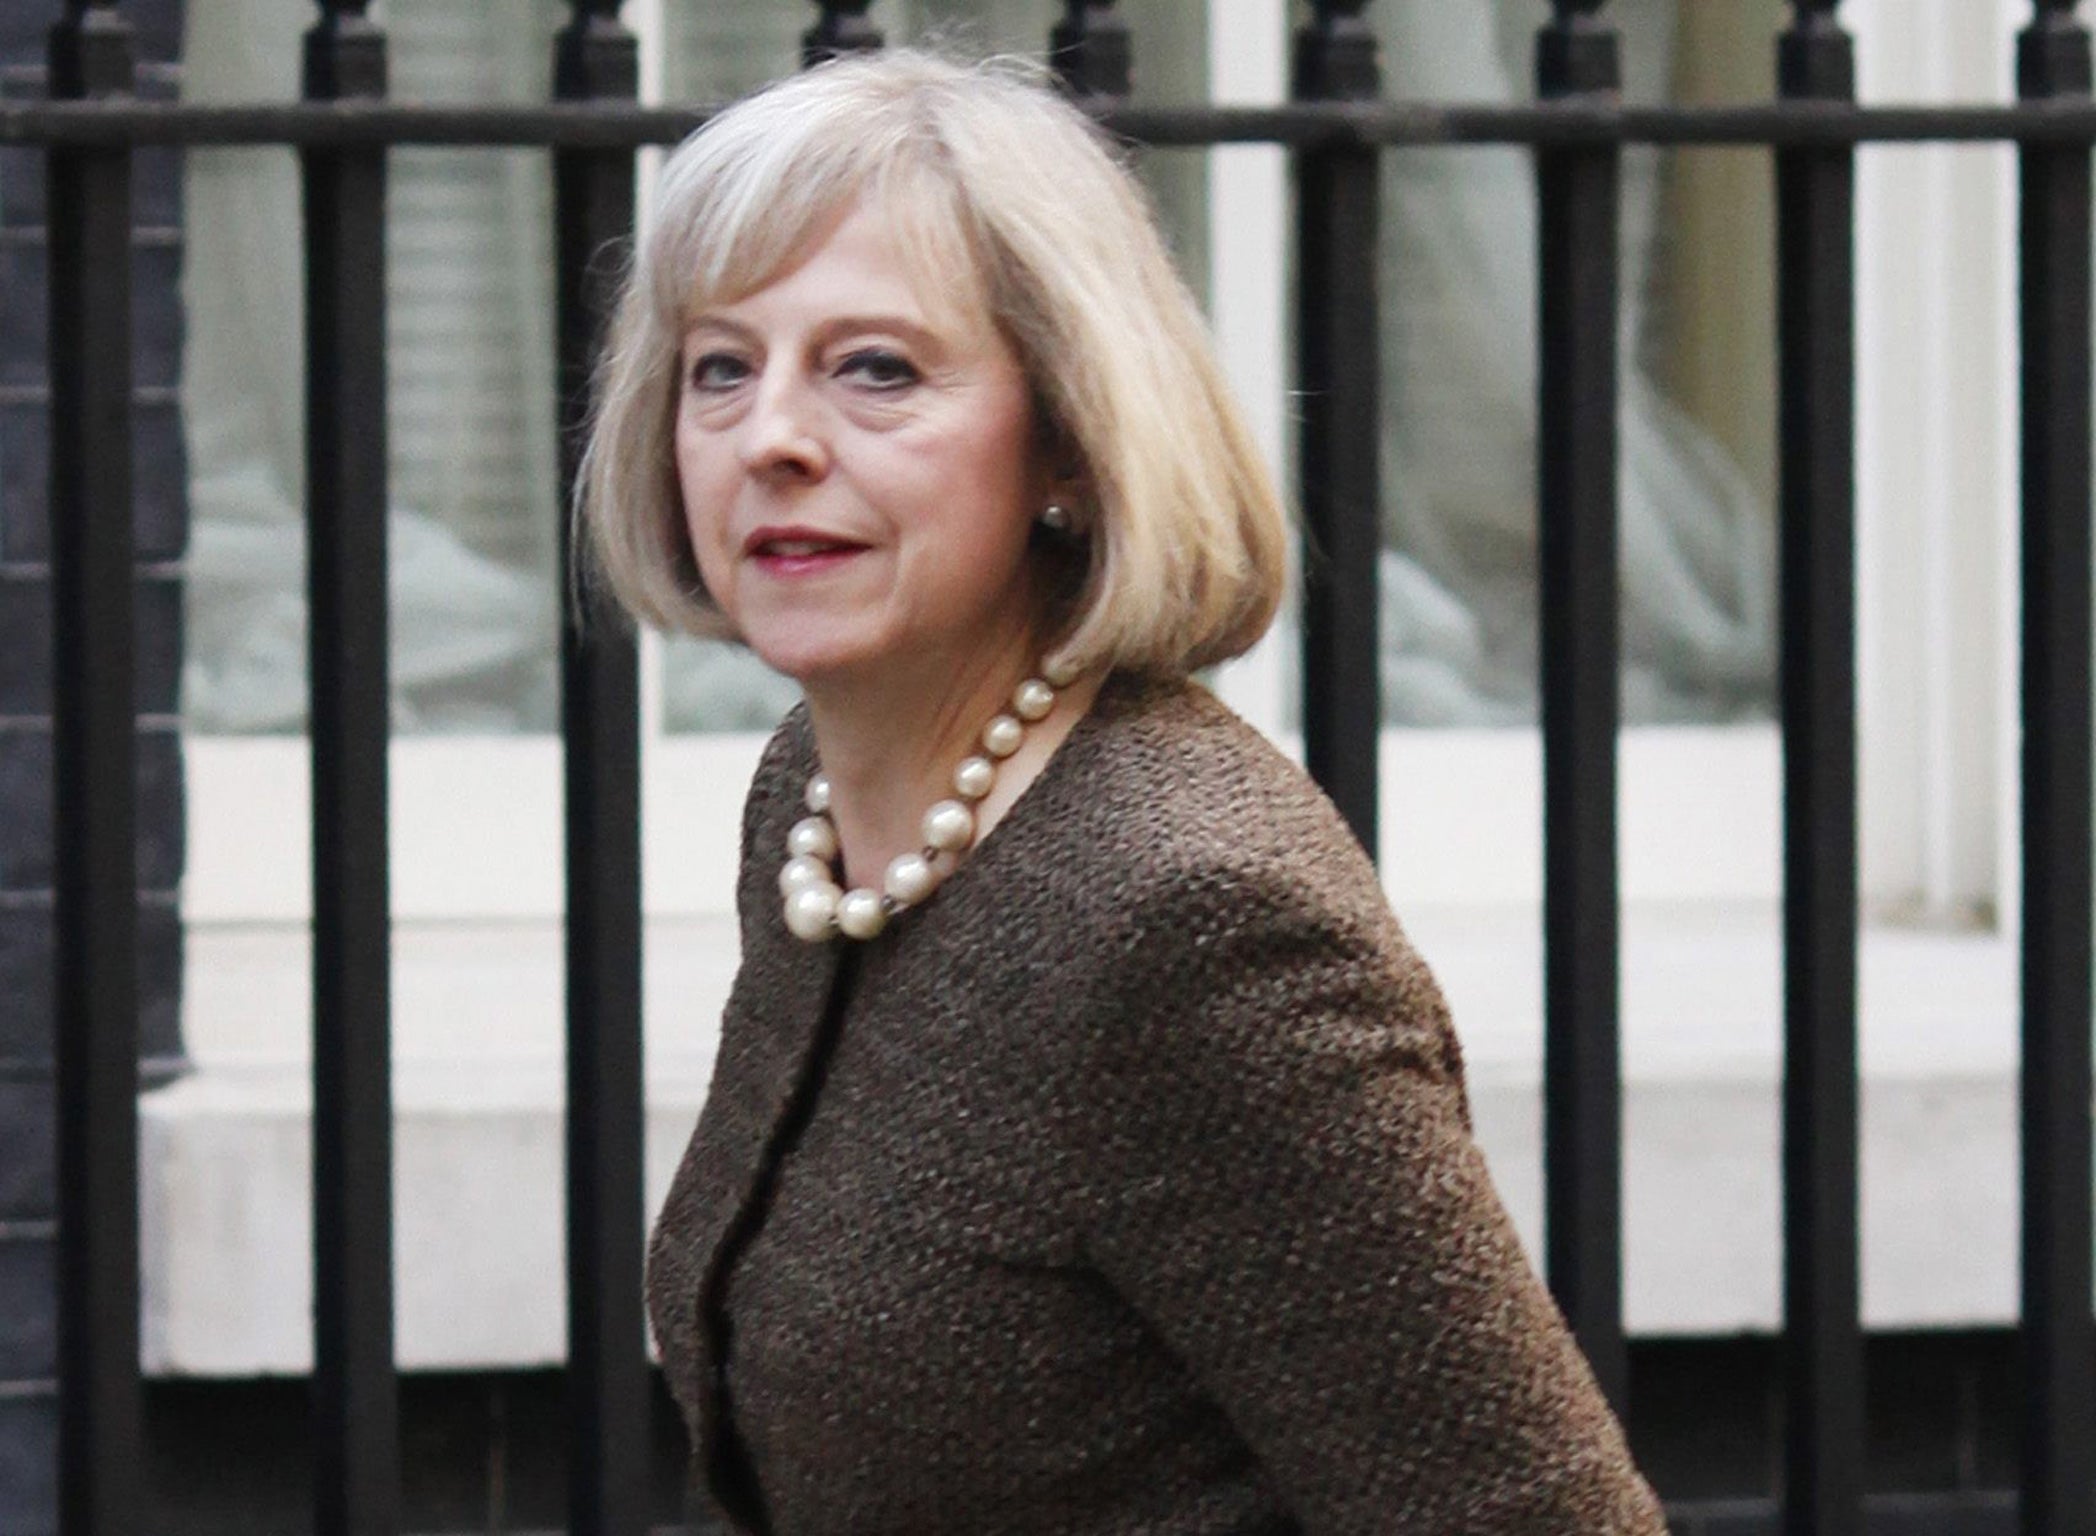 David Cameron and the Home Secretary, Theresa May (pictured), highlighted a possible 40p baseline for alcohol earlier this year when they confirmed the coalition supported minimum pricing